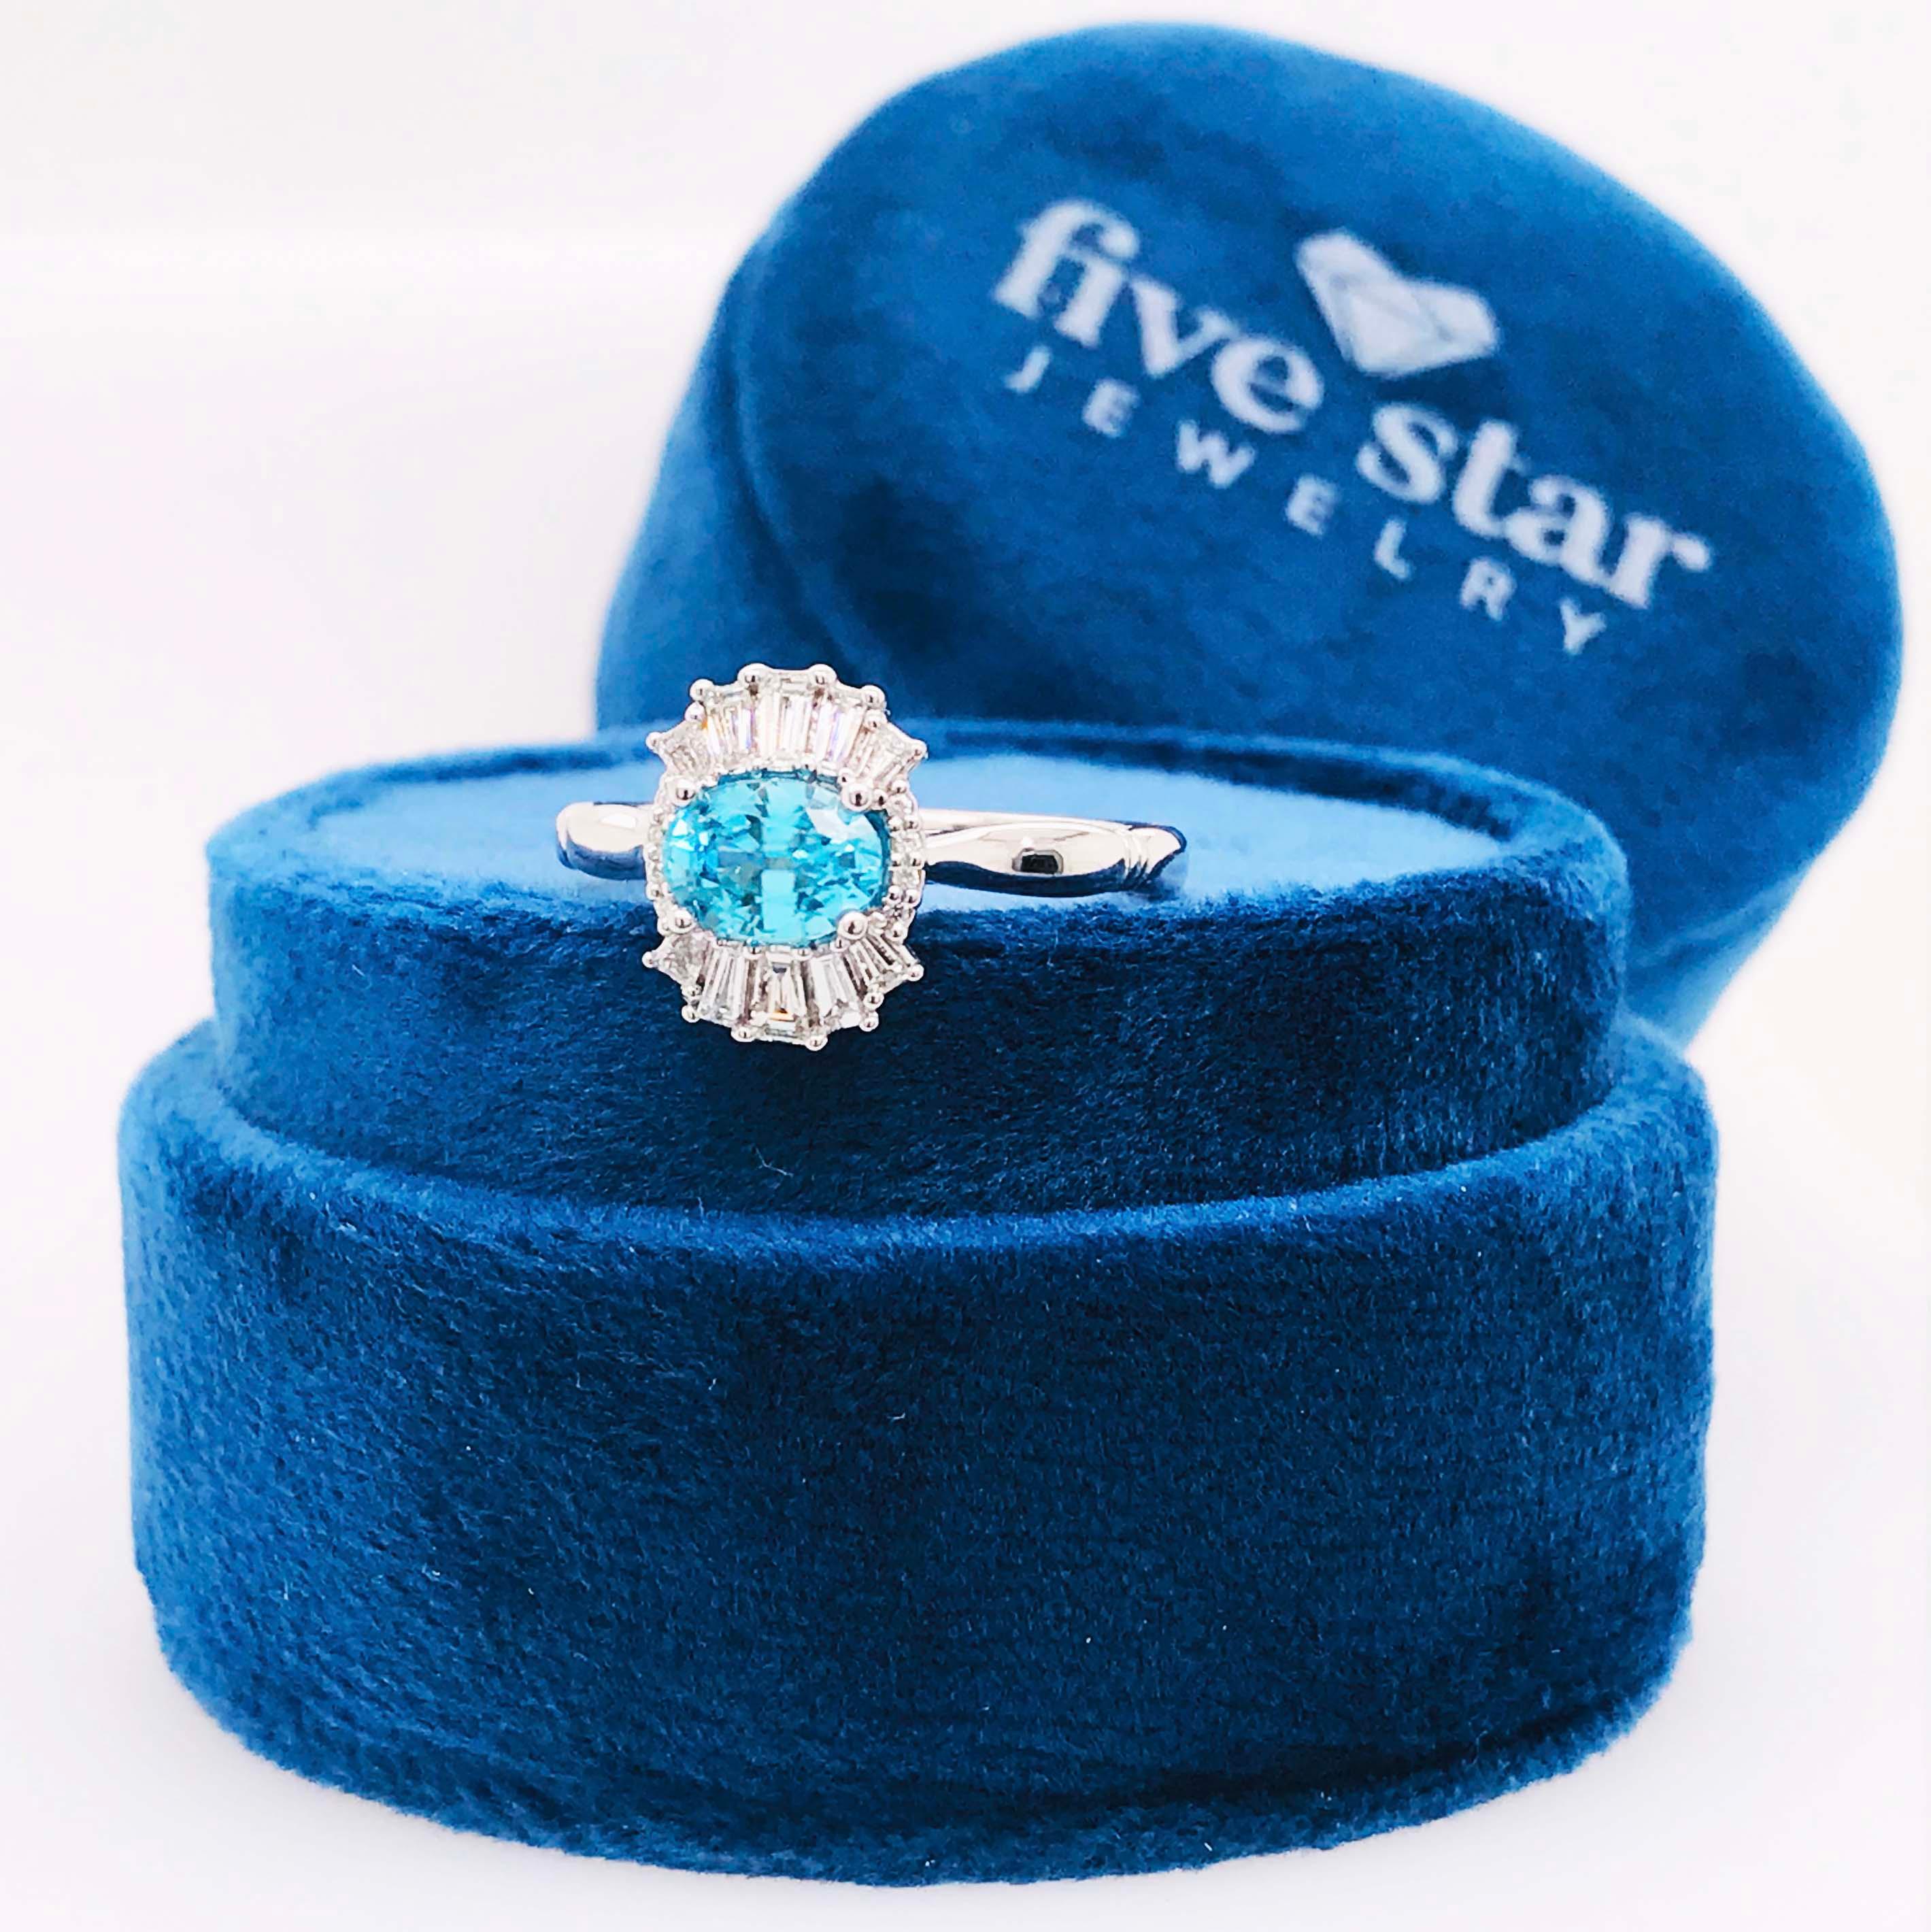 This striking blue zircon and diamond ring is an unusual and gorgeous design with genuine natural gemstones. The center of this gorgeous piece is a bright blue oval zircon measuring 7 mm long by 5mm wide, set east to west for a contemporary style on